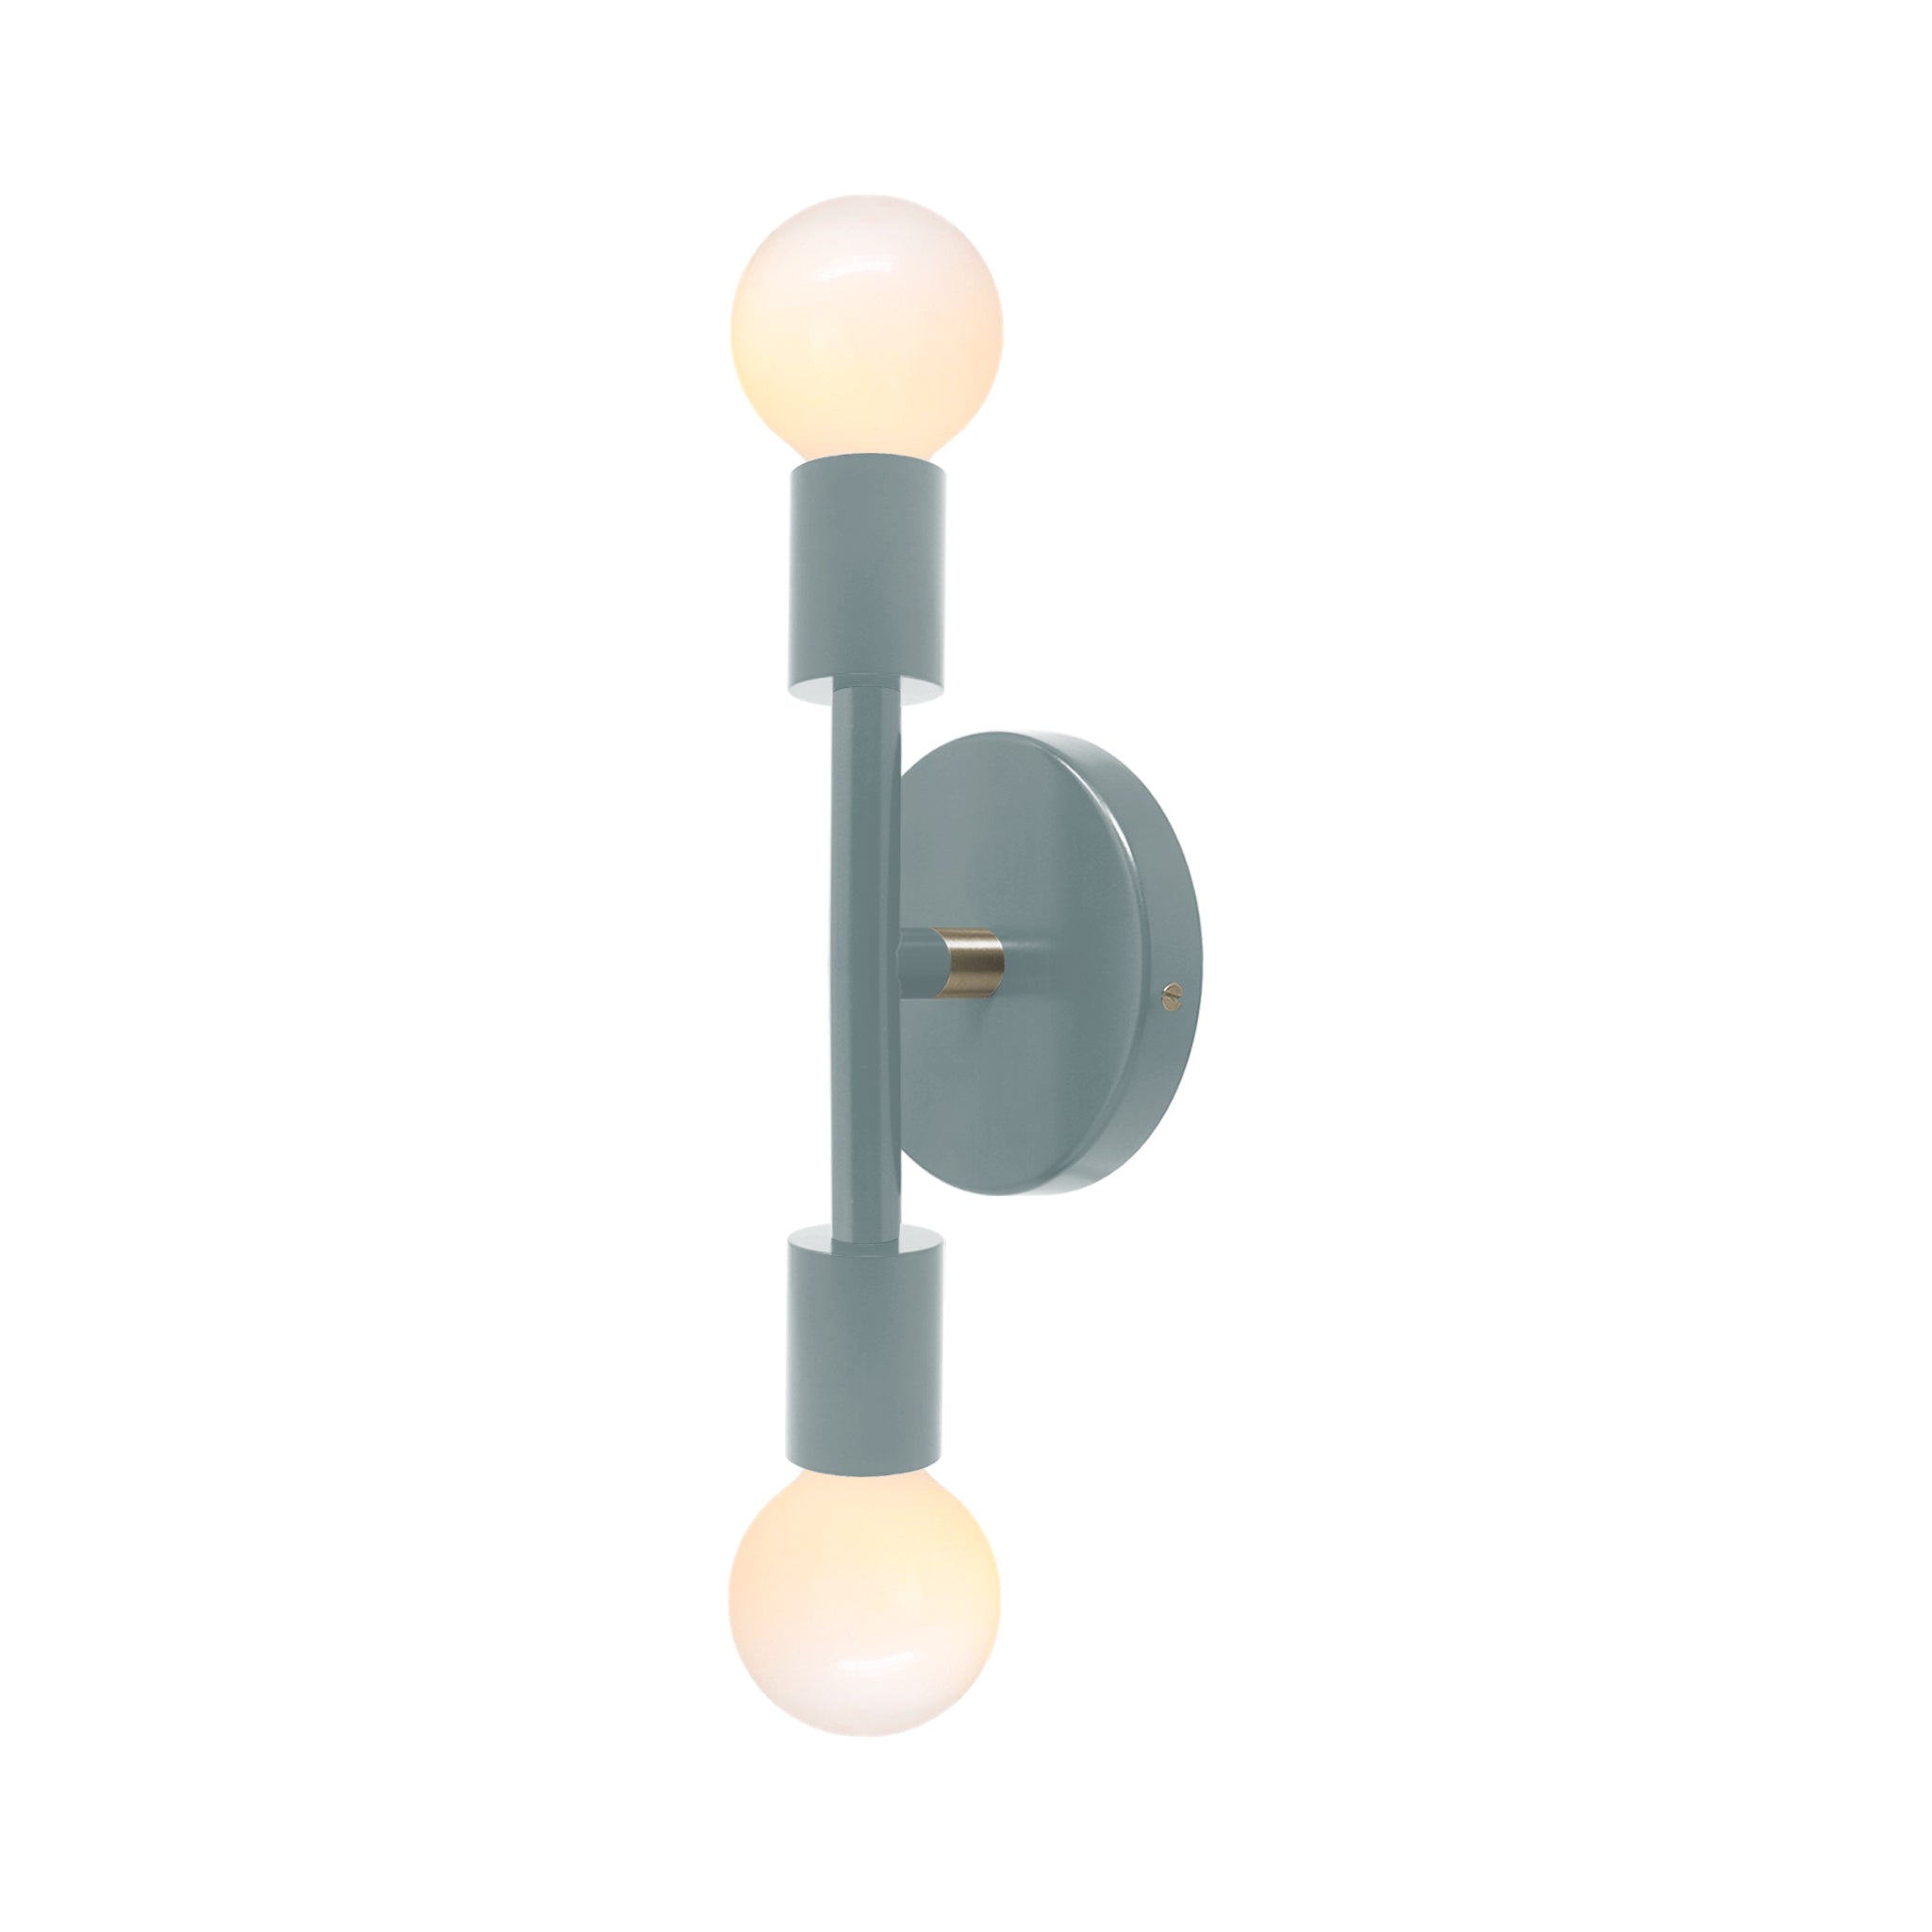 Nickel and python green color Pilot sconce 11" Dutton Brown lighting